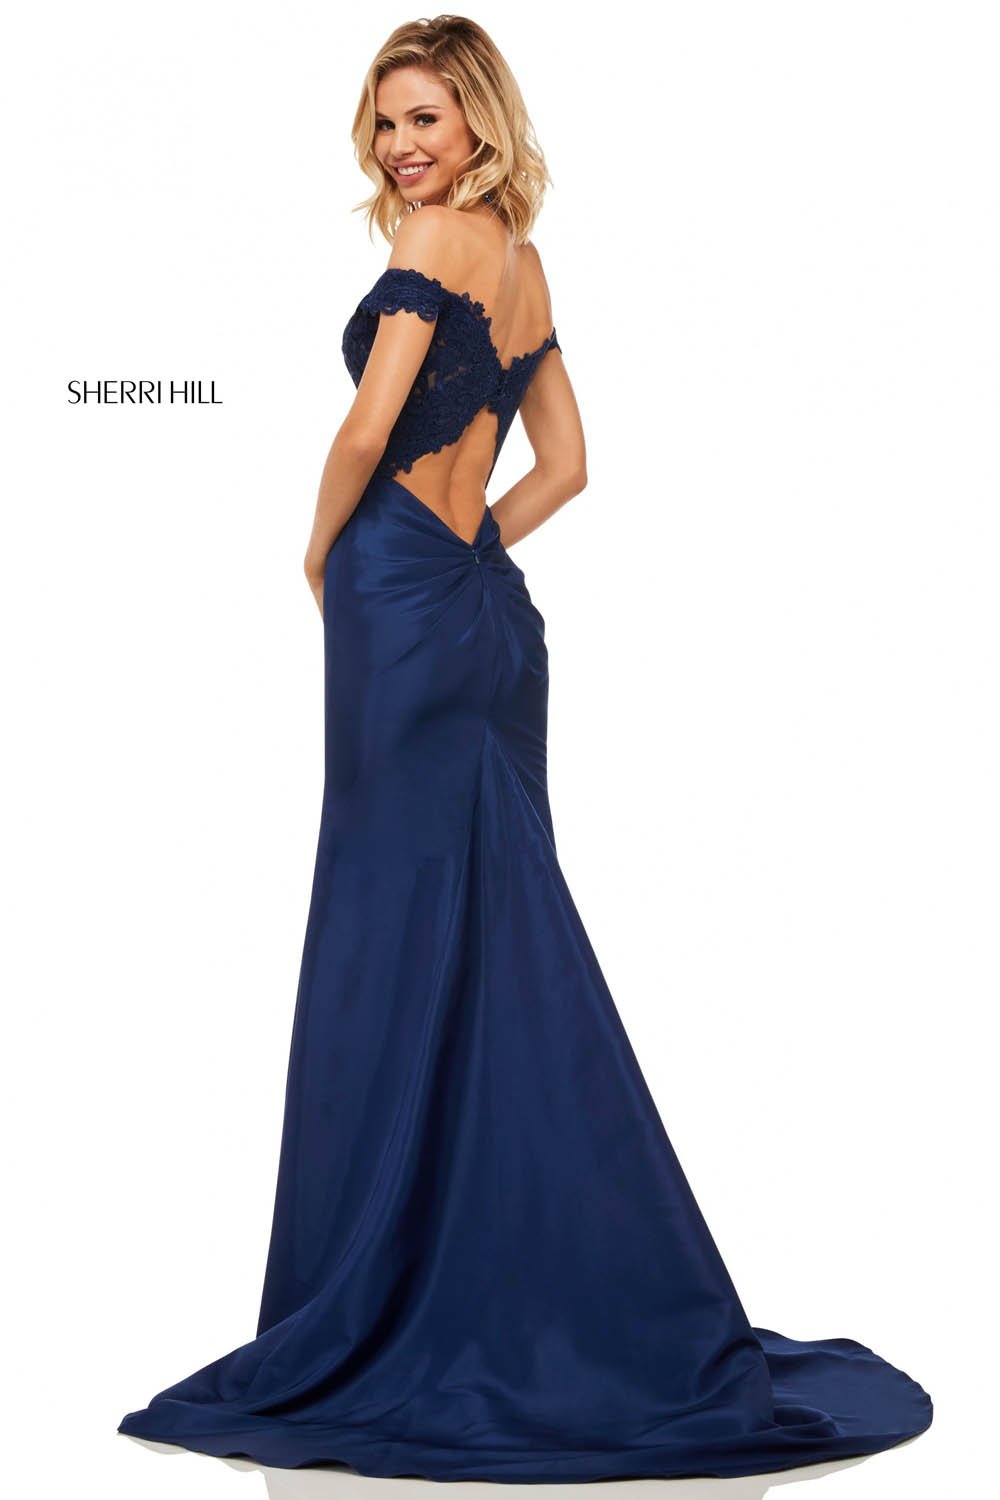 Sherri Hill 52874 dress images in these colors: Red, Light Blue, Navy, Yellow, Black, Blush.